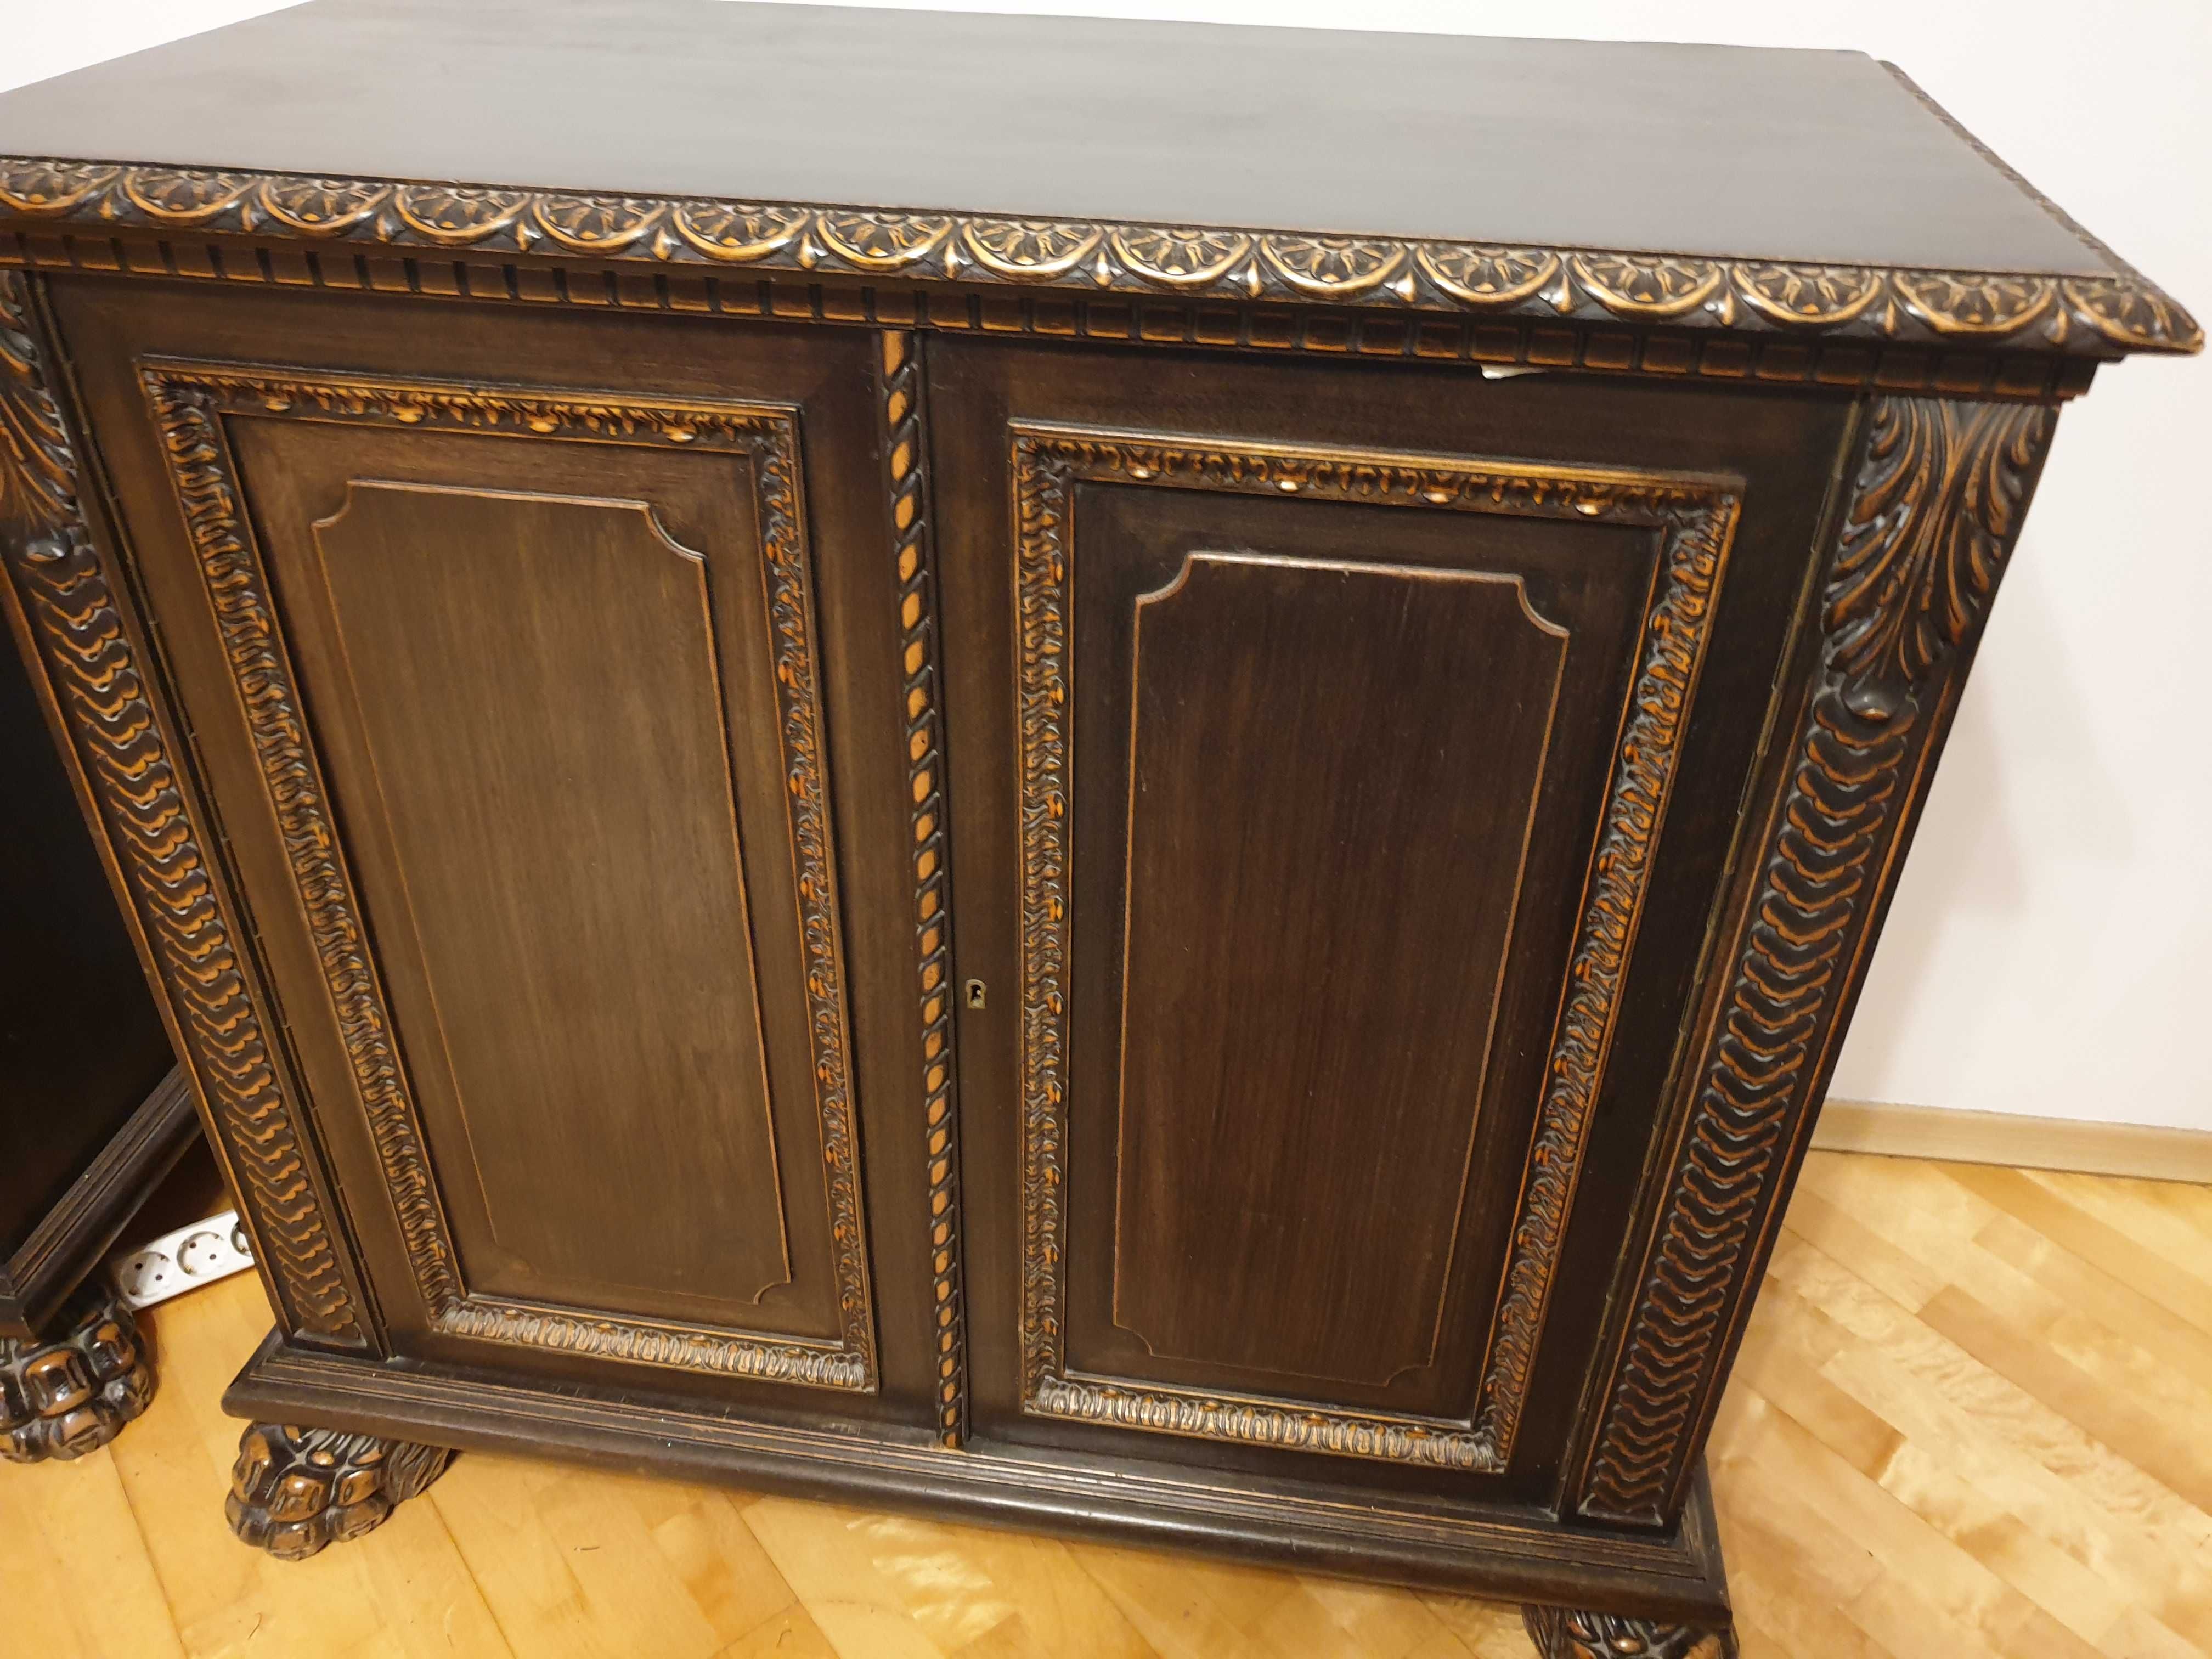 Vand mobilier vechime 150 ani